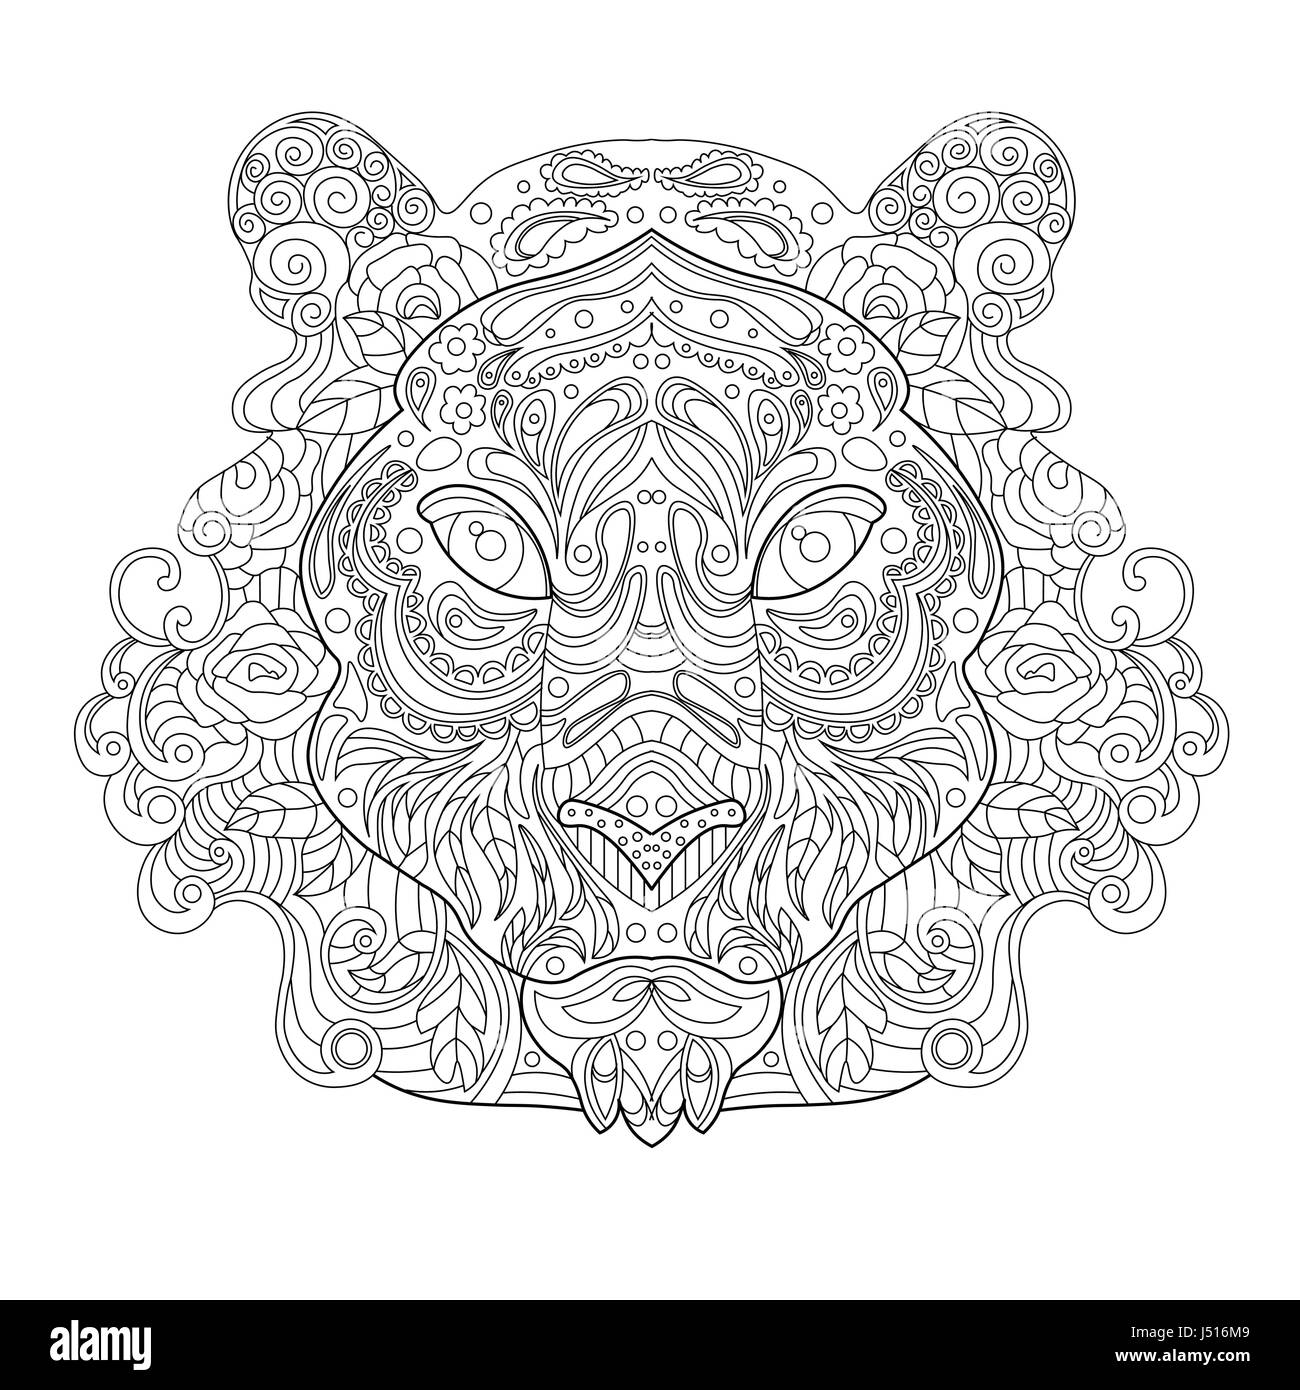 Ethnic Zentagle Ornate Hand Drawn Tiger Head. Black and White Ink Doodle Vector Illustration. Sketch for Tattoo, Poster, Print or t-shirt. Relaxing Co Stock Vector